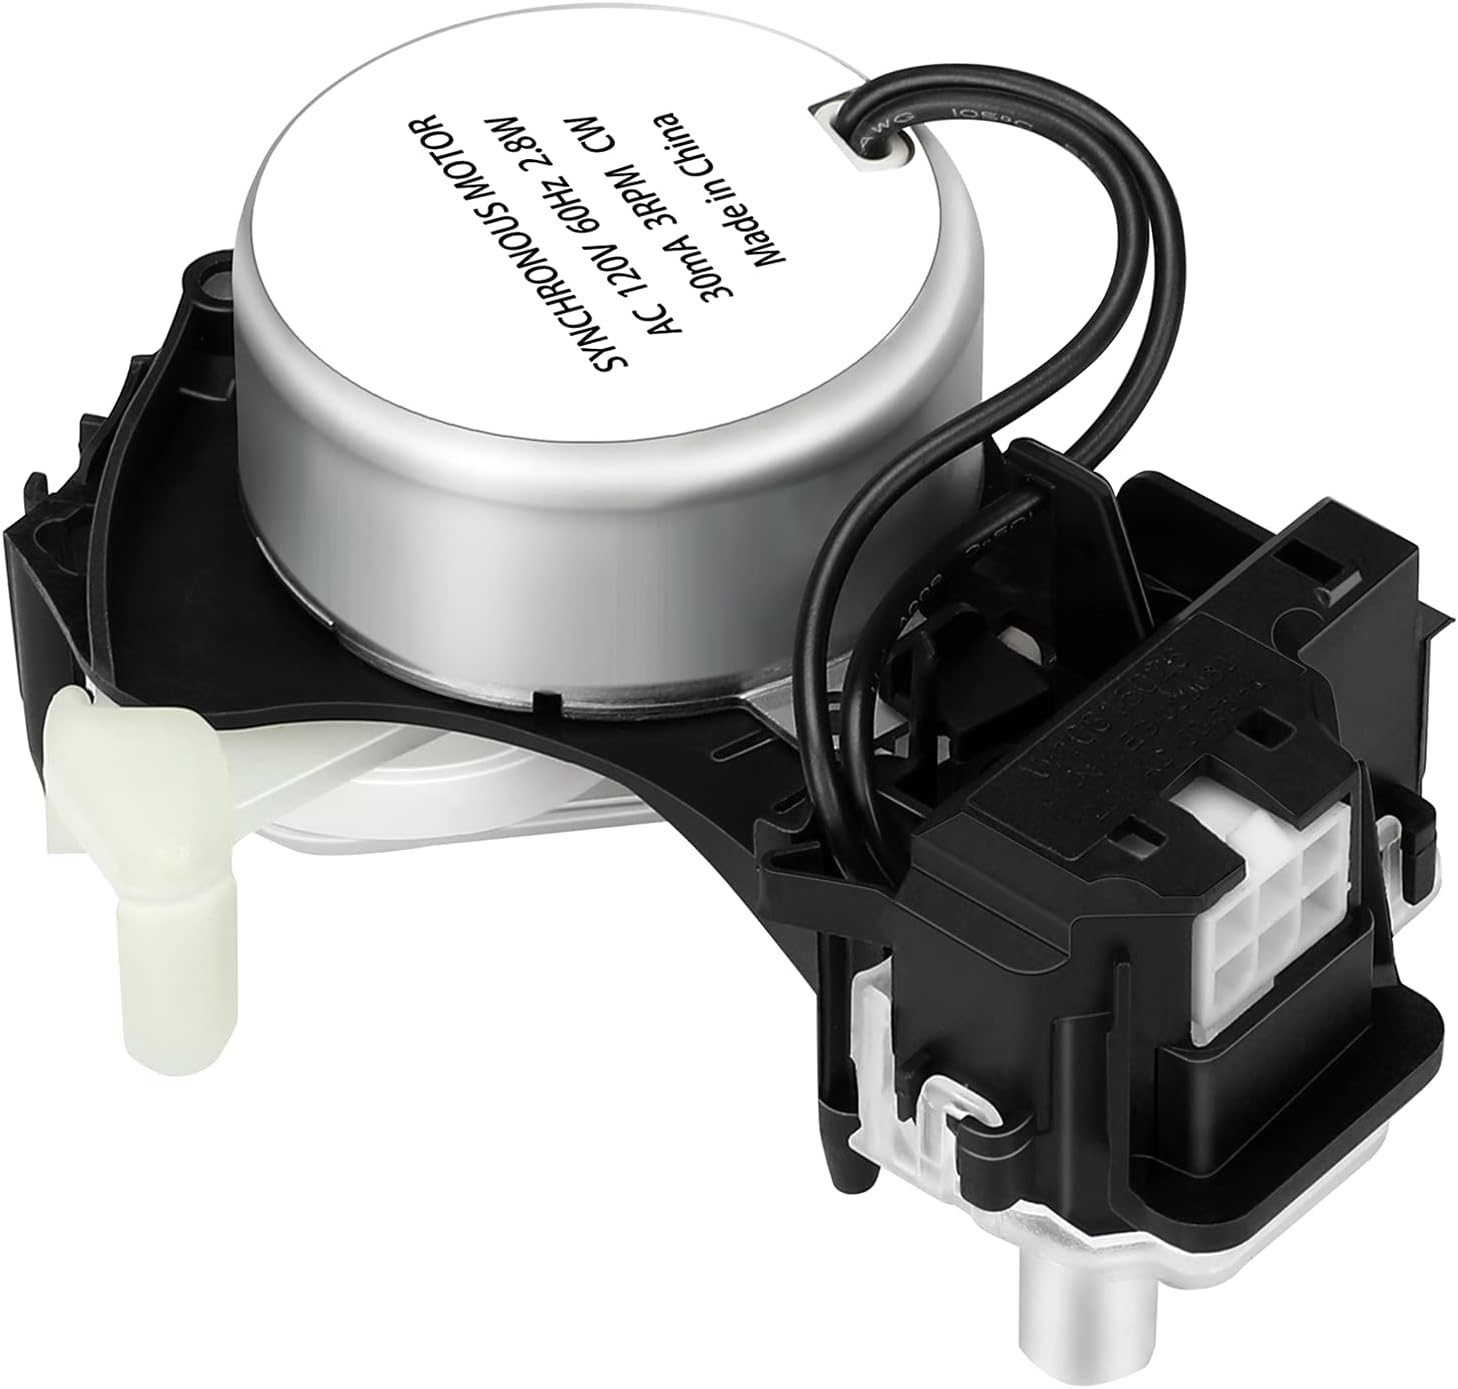 lforbb W10913953 Washer Shift Actuator,W10815026 Actuator Replacement Compatible with Whirlpool Maytag Centennial Kenmore Amana WTW500